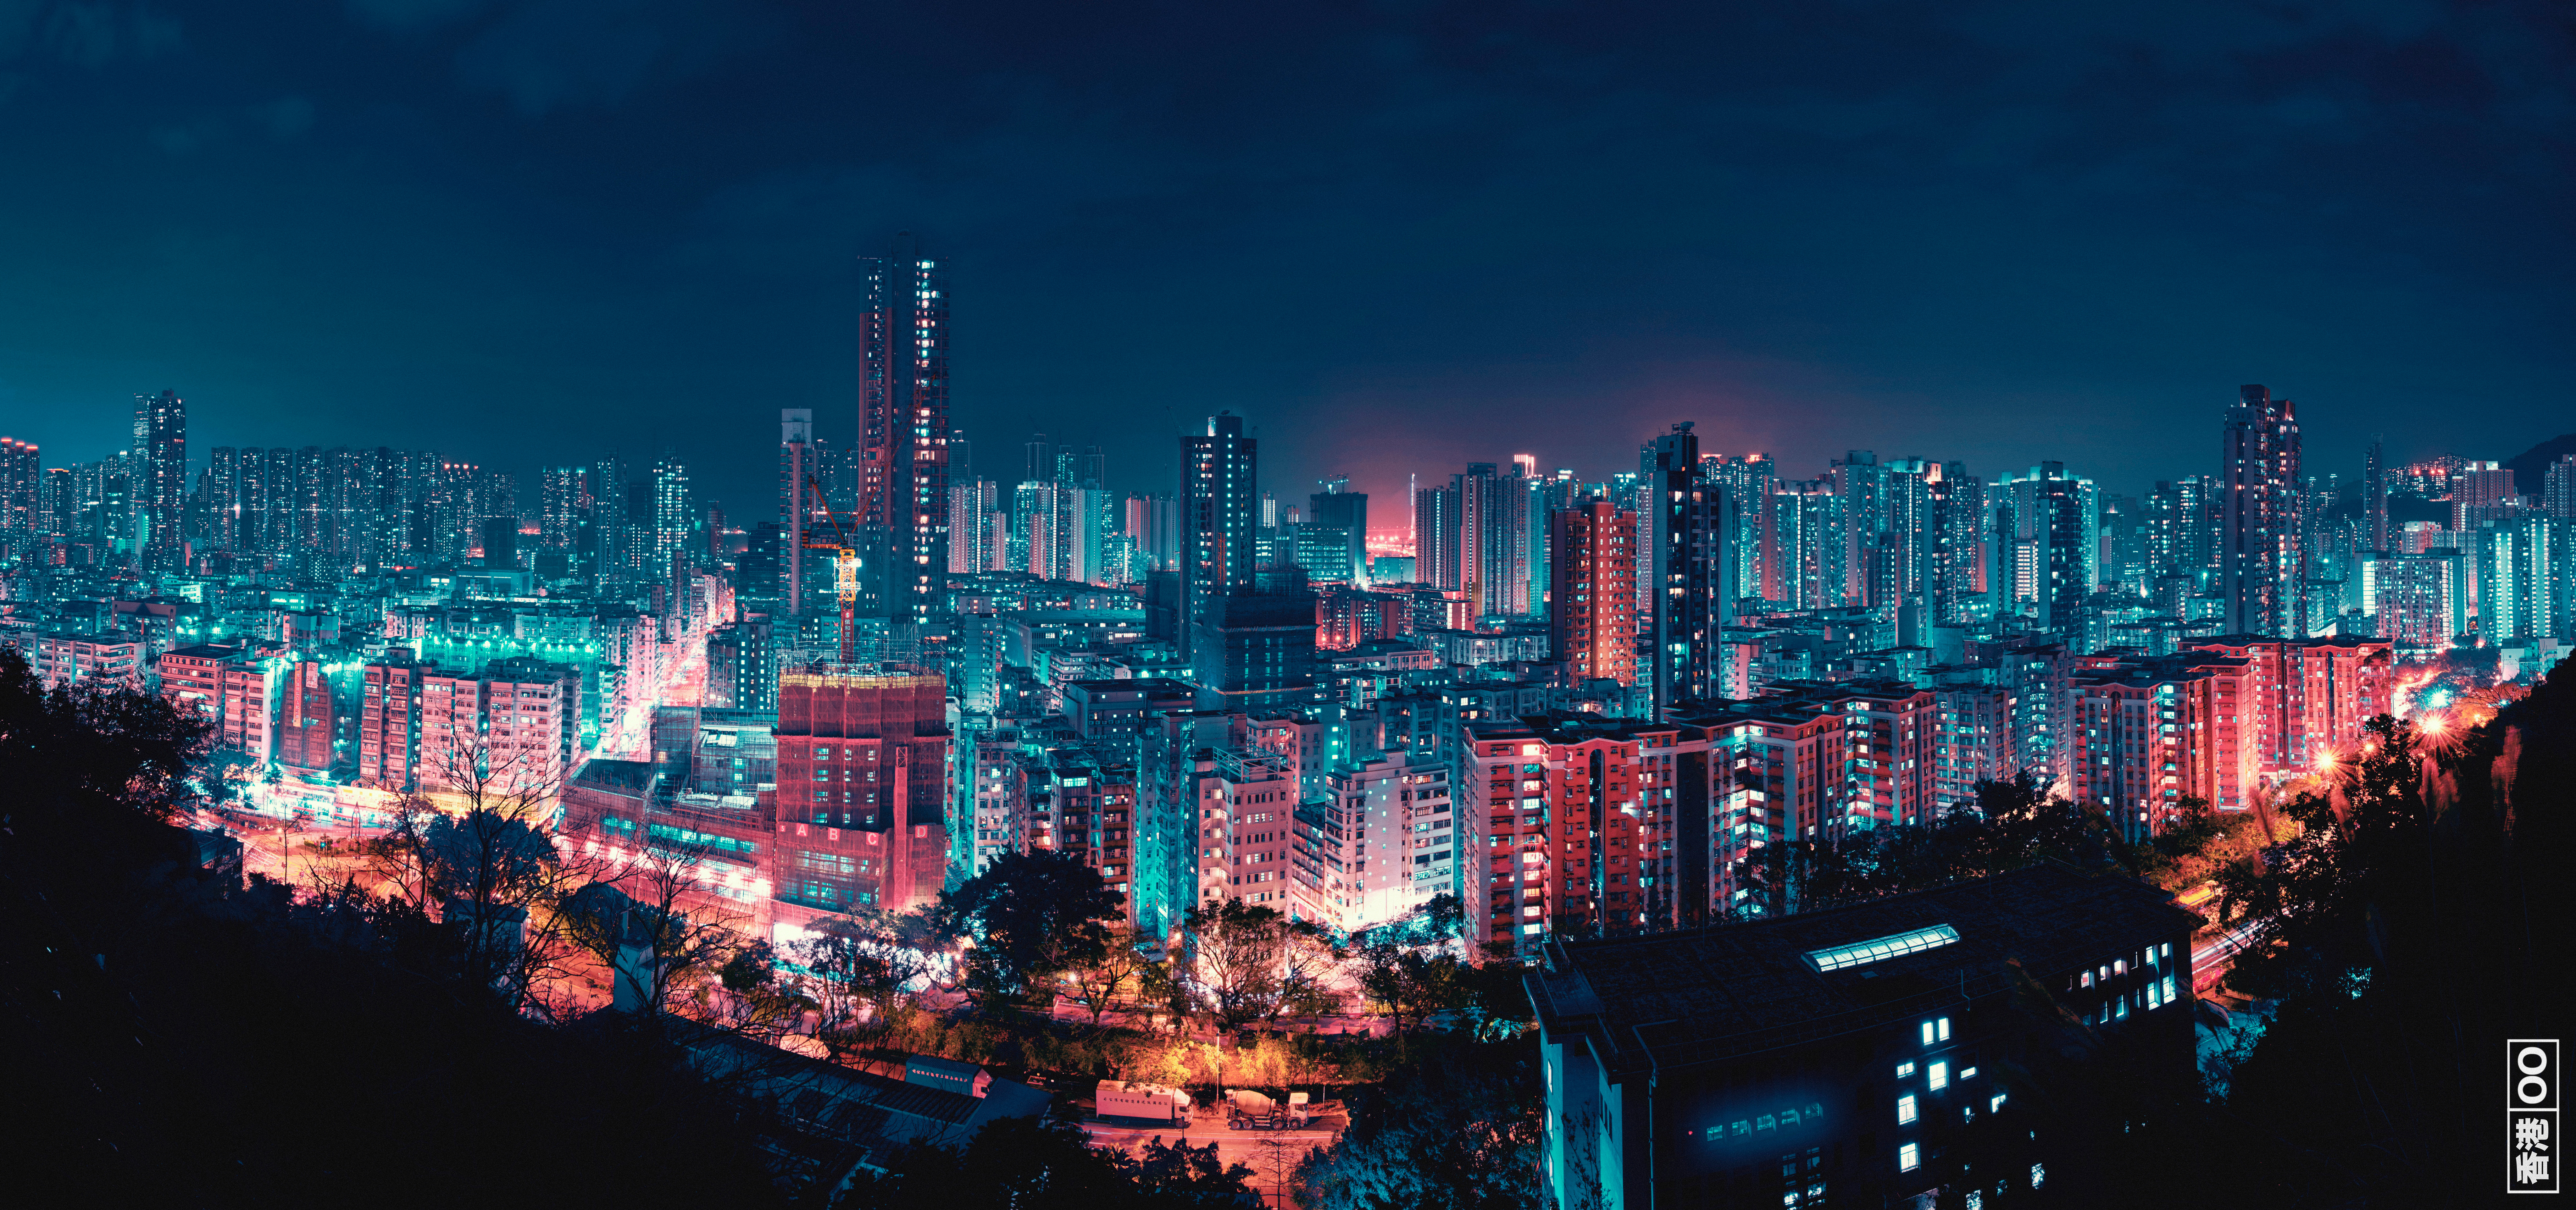 General 8192x3849 wide screen city city lights cityscape nightscape neon night street Hong Kong photography skyscraper building architecture